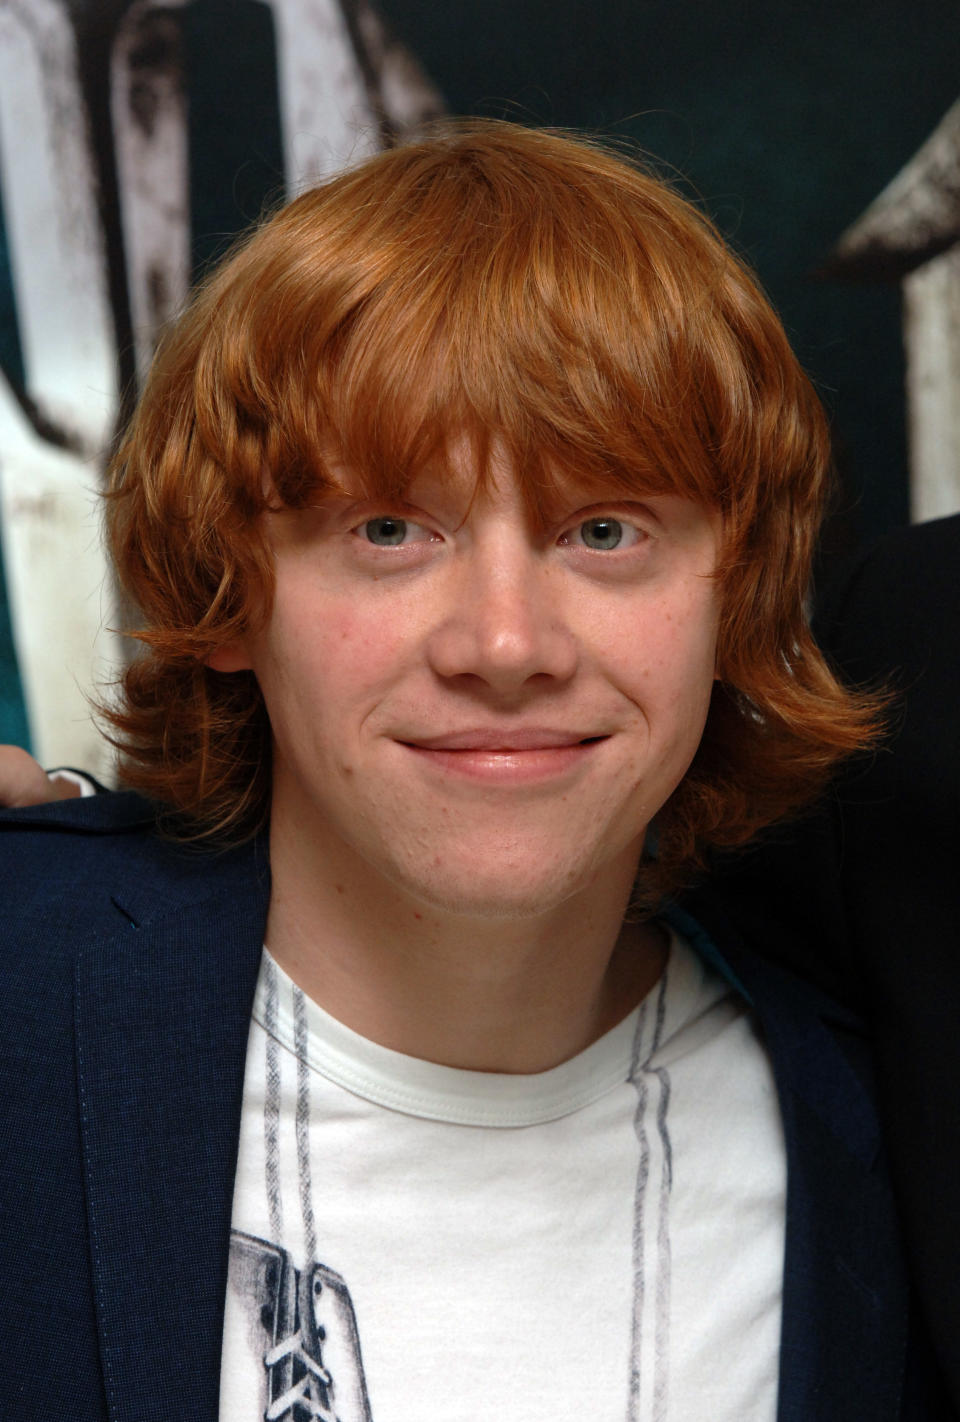 Rupert Grint arrives for the UK Premiere of Harry Potter And The Order Of The Phoenix at the Odeon Leicester Square, central London.